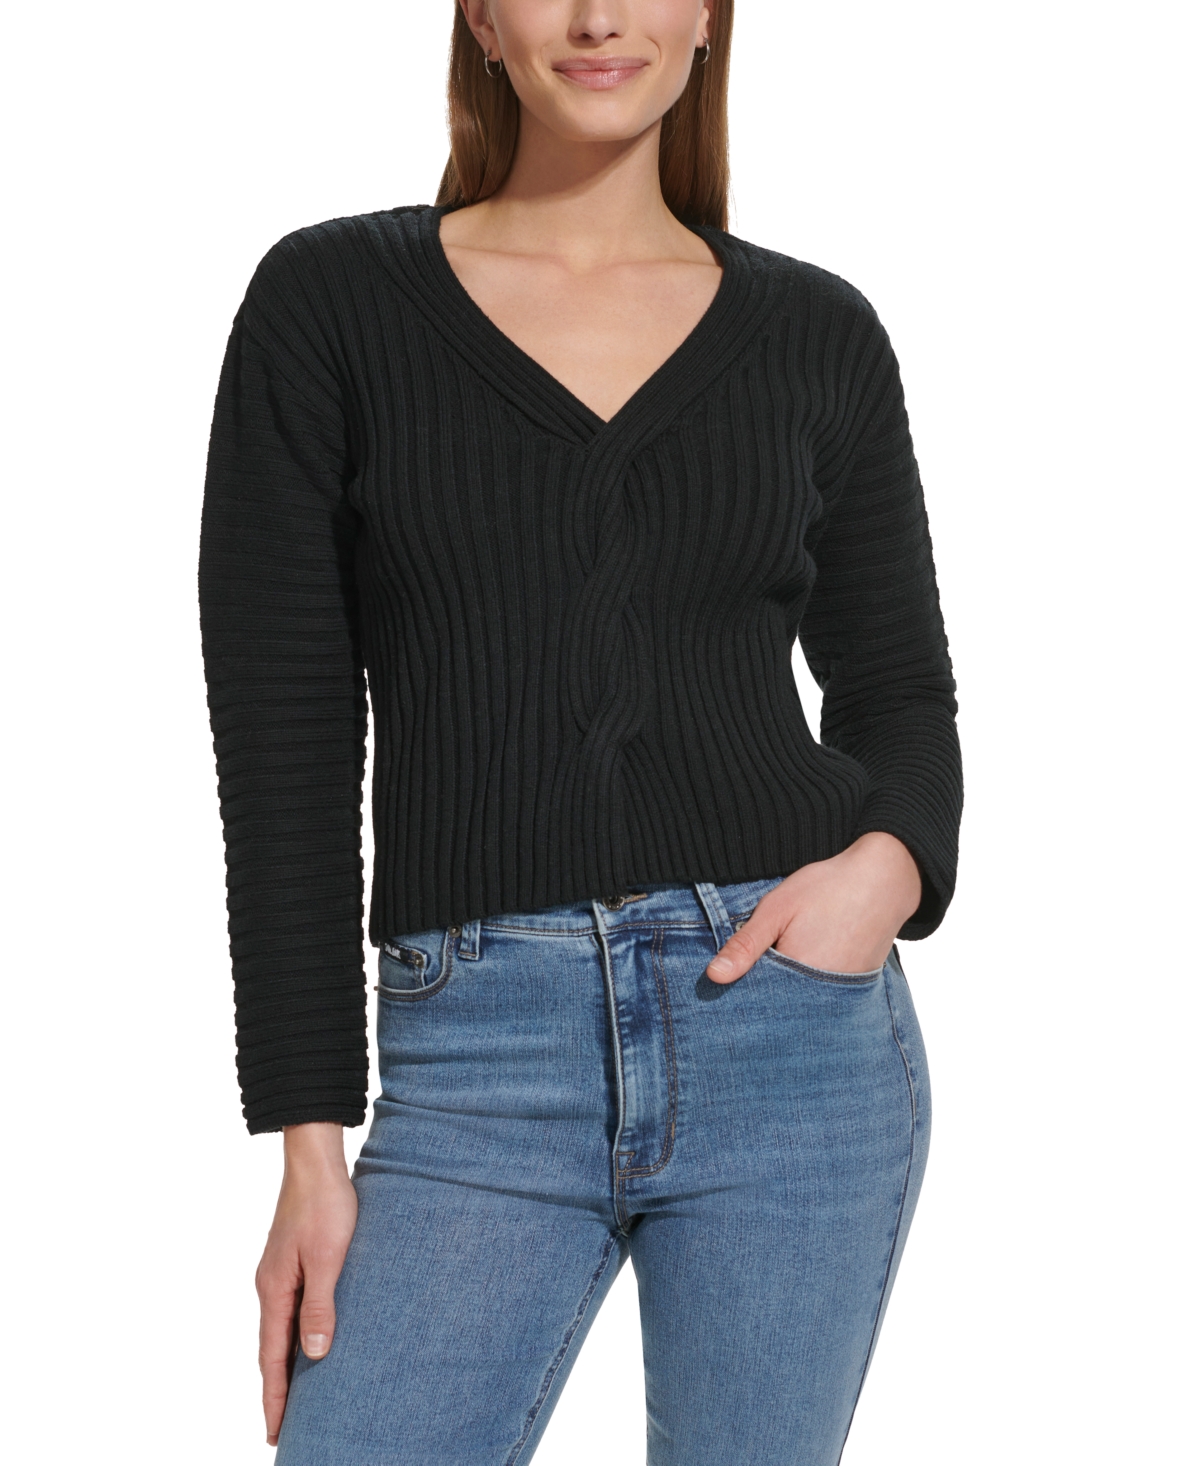 Women's Cable-Knit Cropped V-Neck Sweater - Blk - Black